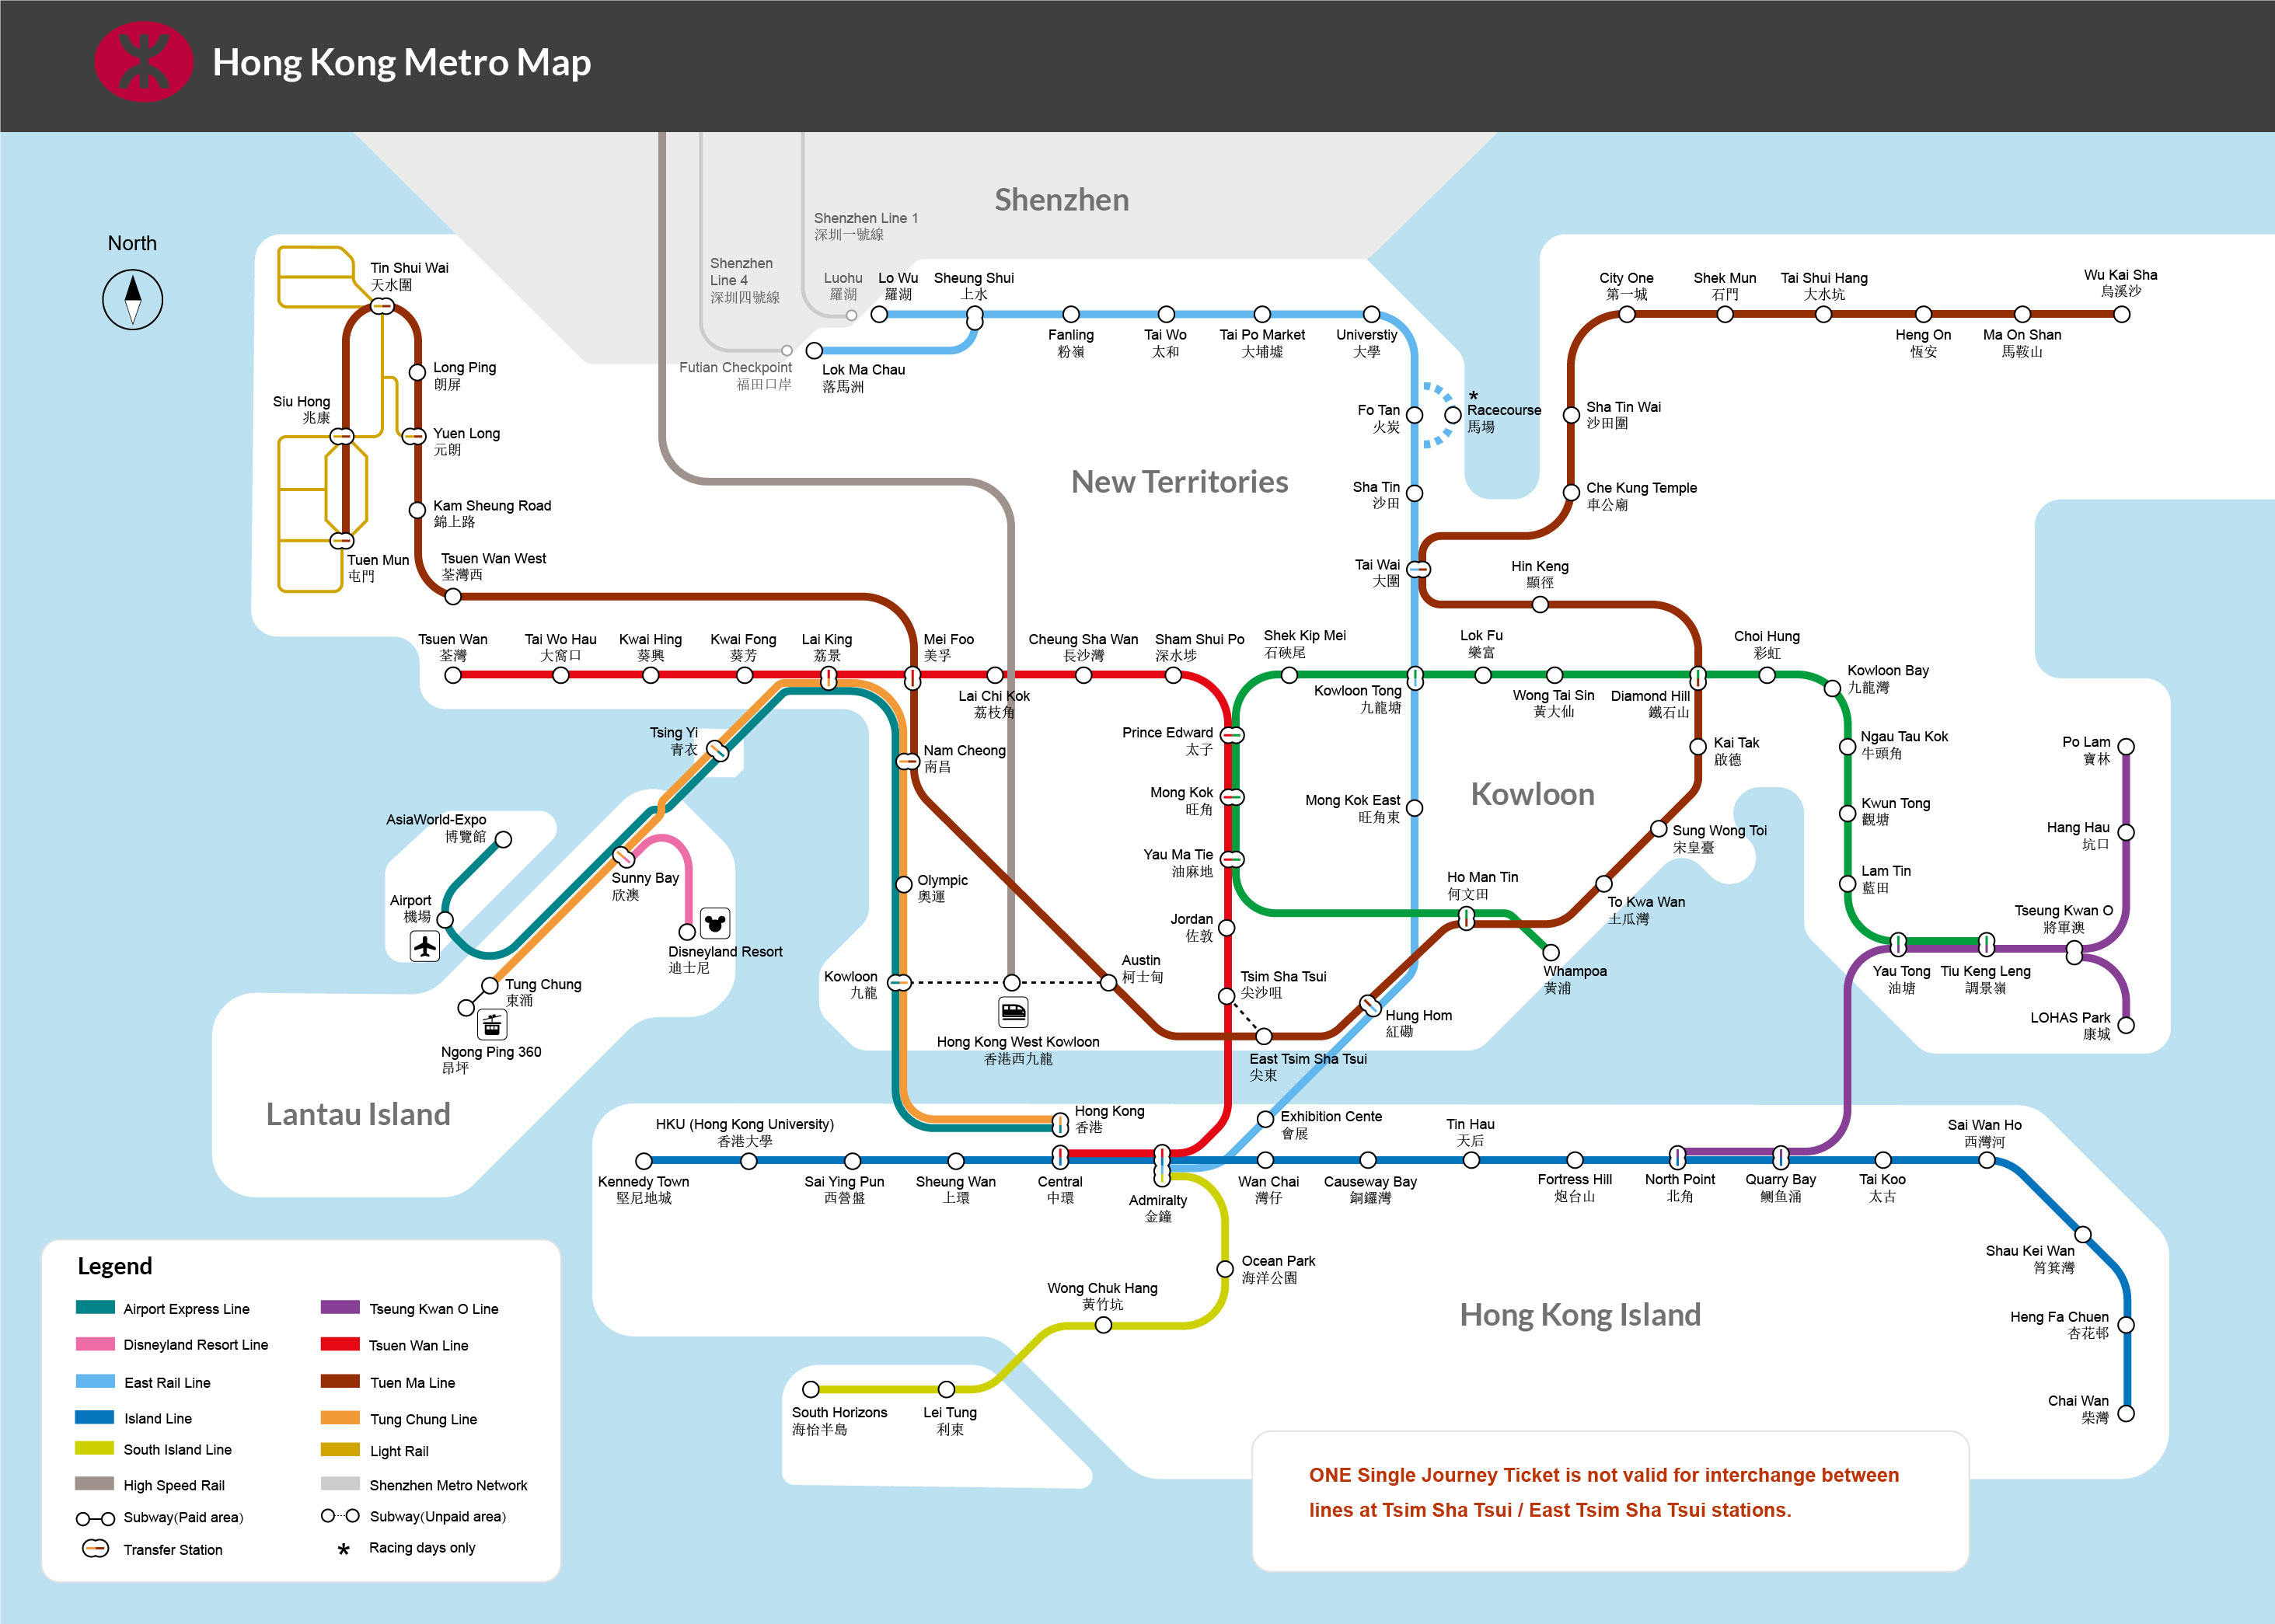 Hong Kong Metro Mtr Subway Stations Service Hours And Ticket Fare